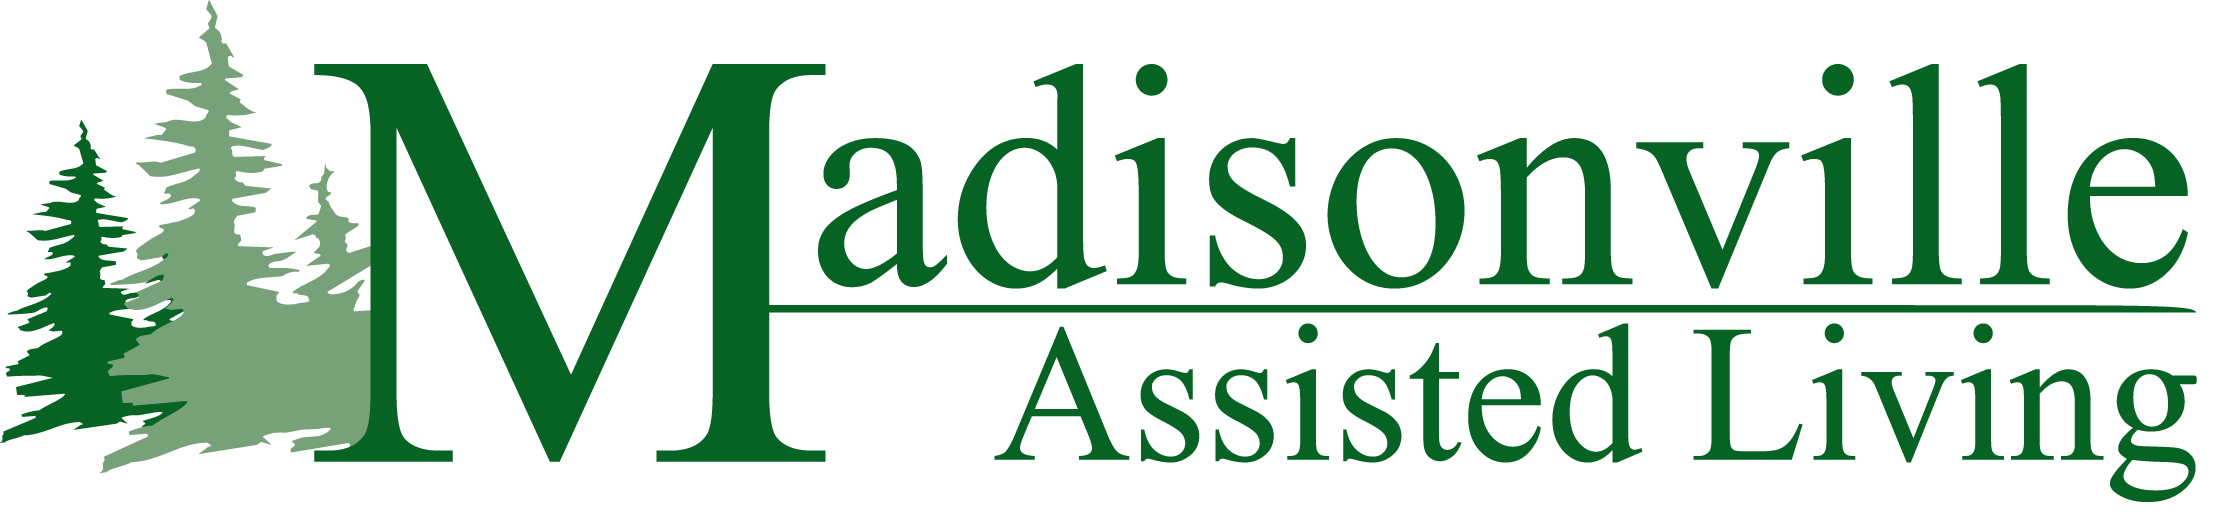 Madisonville Assisted Living